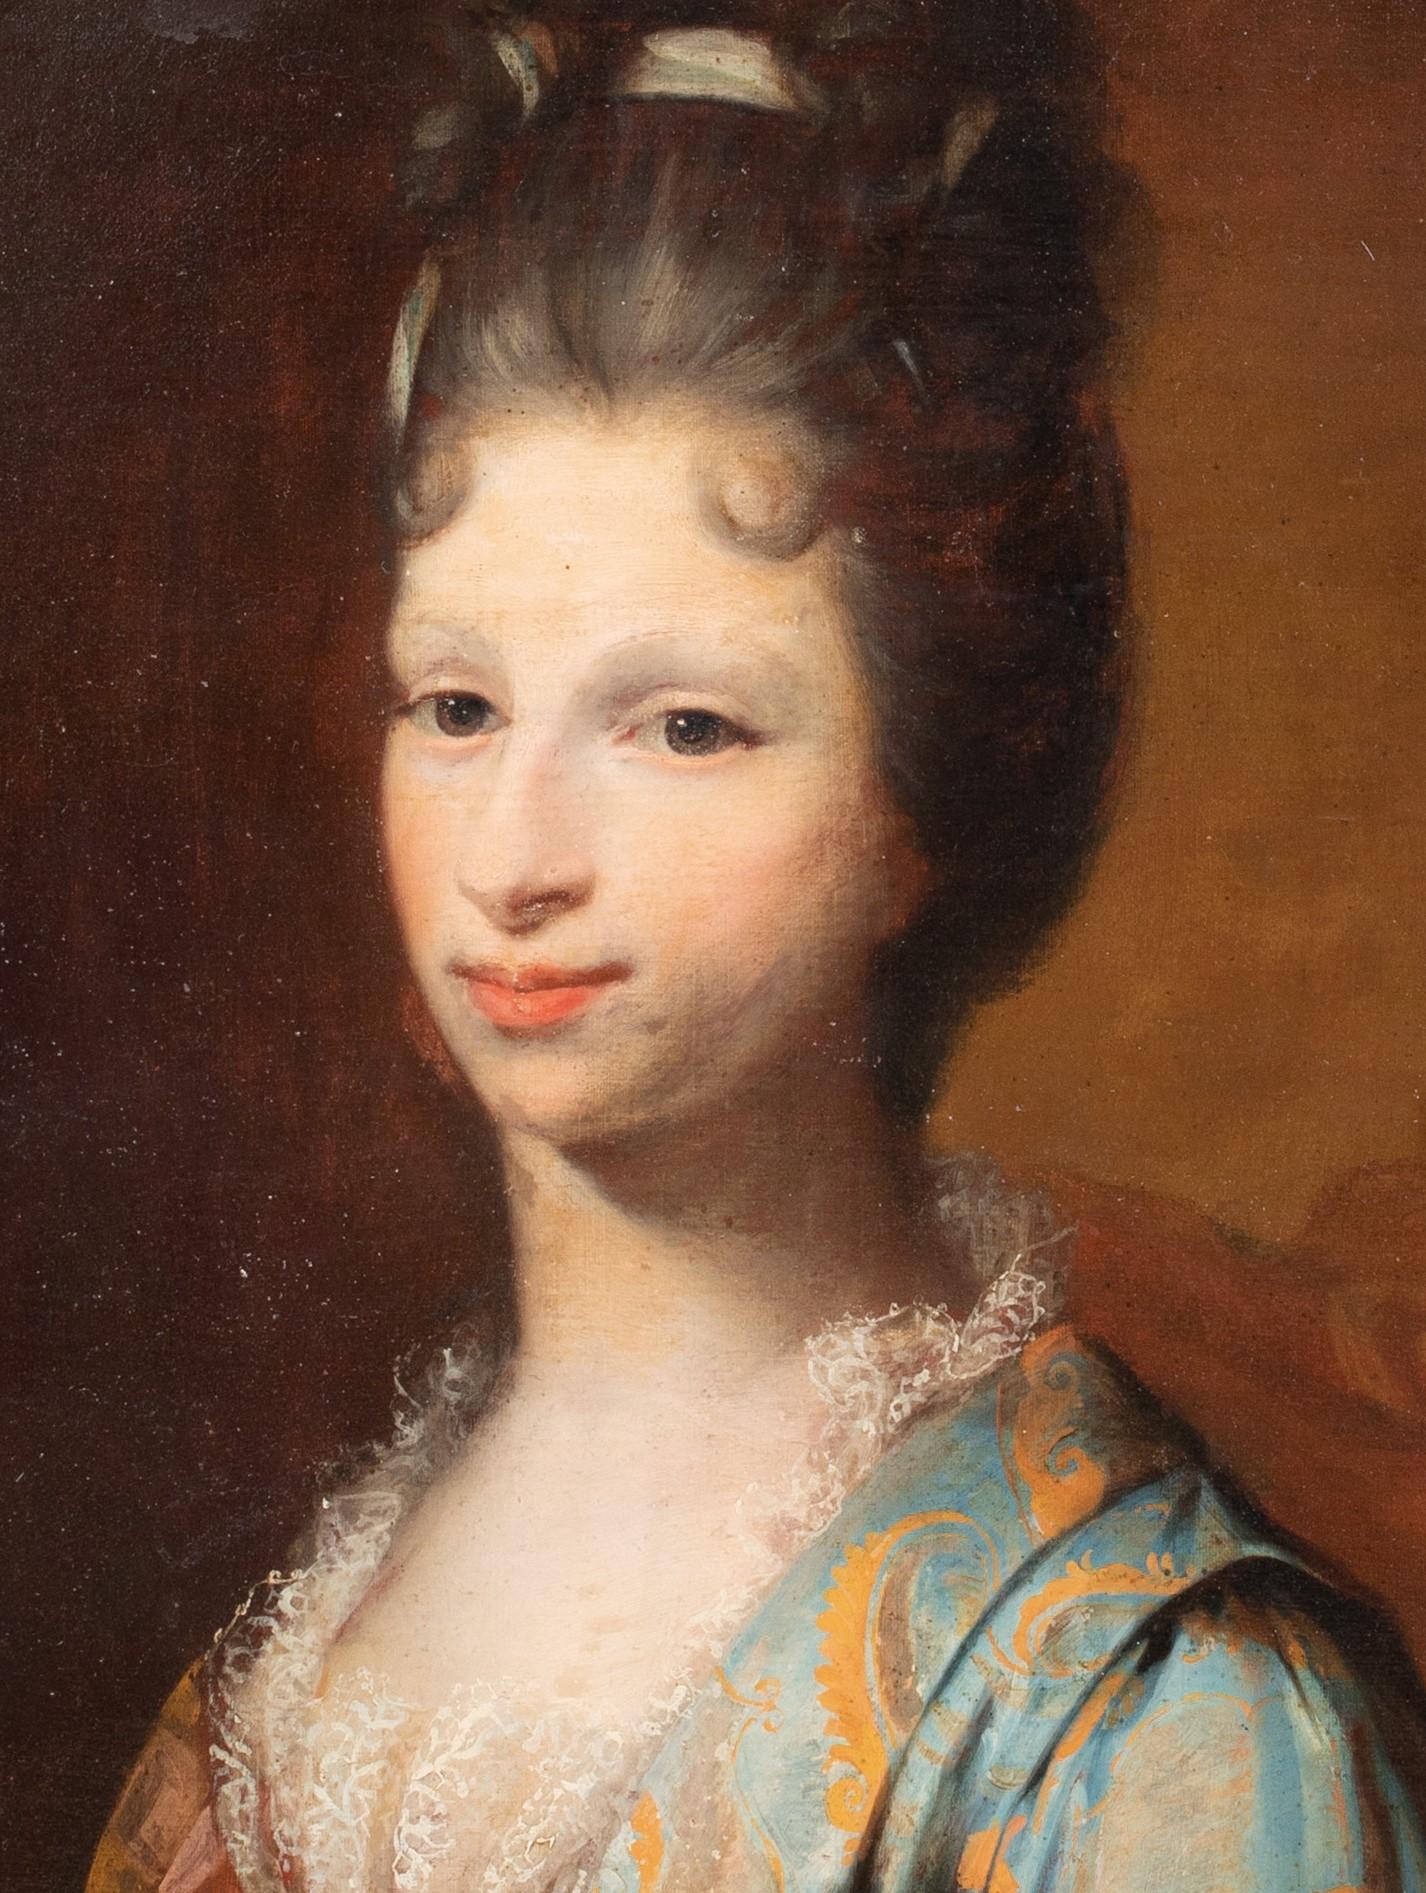 Portrait Of Madame De Cotte, circa 1710

circle of Hyacinthe RIGAUD (1659-1743) - one of a pair

Large circa 1710 French portrait of Madame De Cotte, oil on canvas. Excellent quality and condition oval portrait of the young lady with her hair up